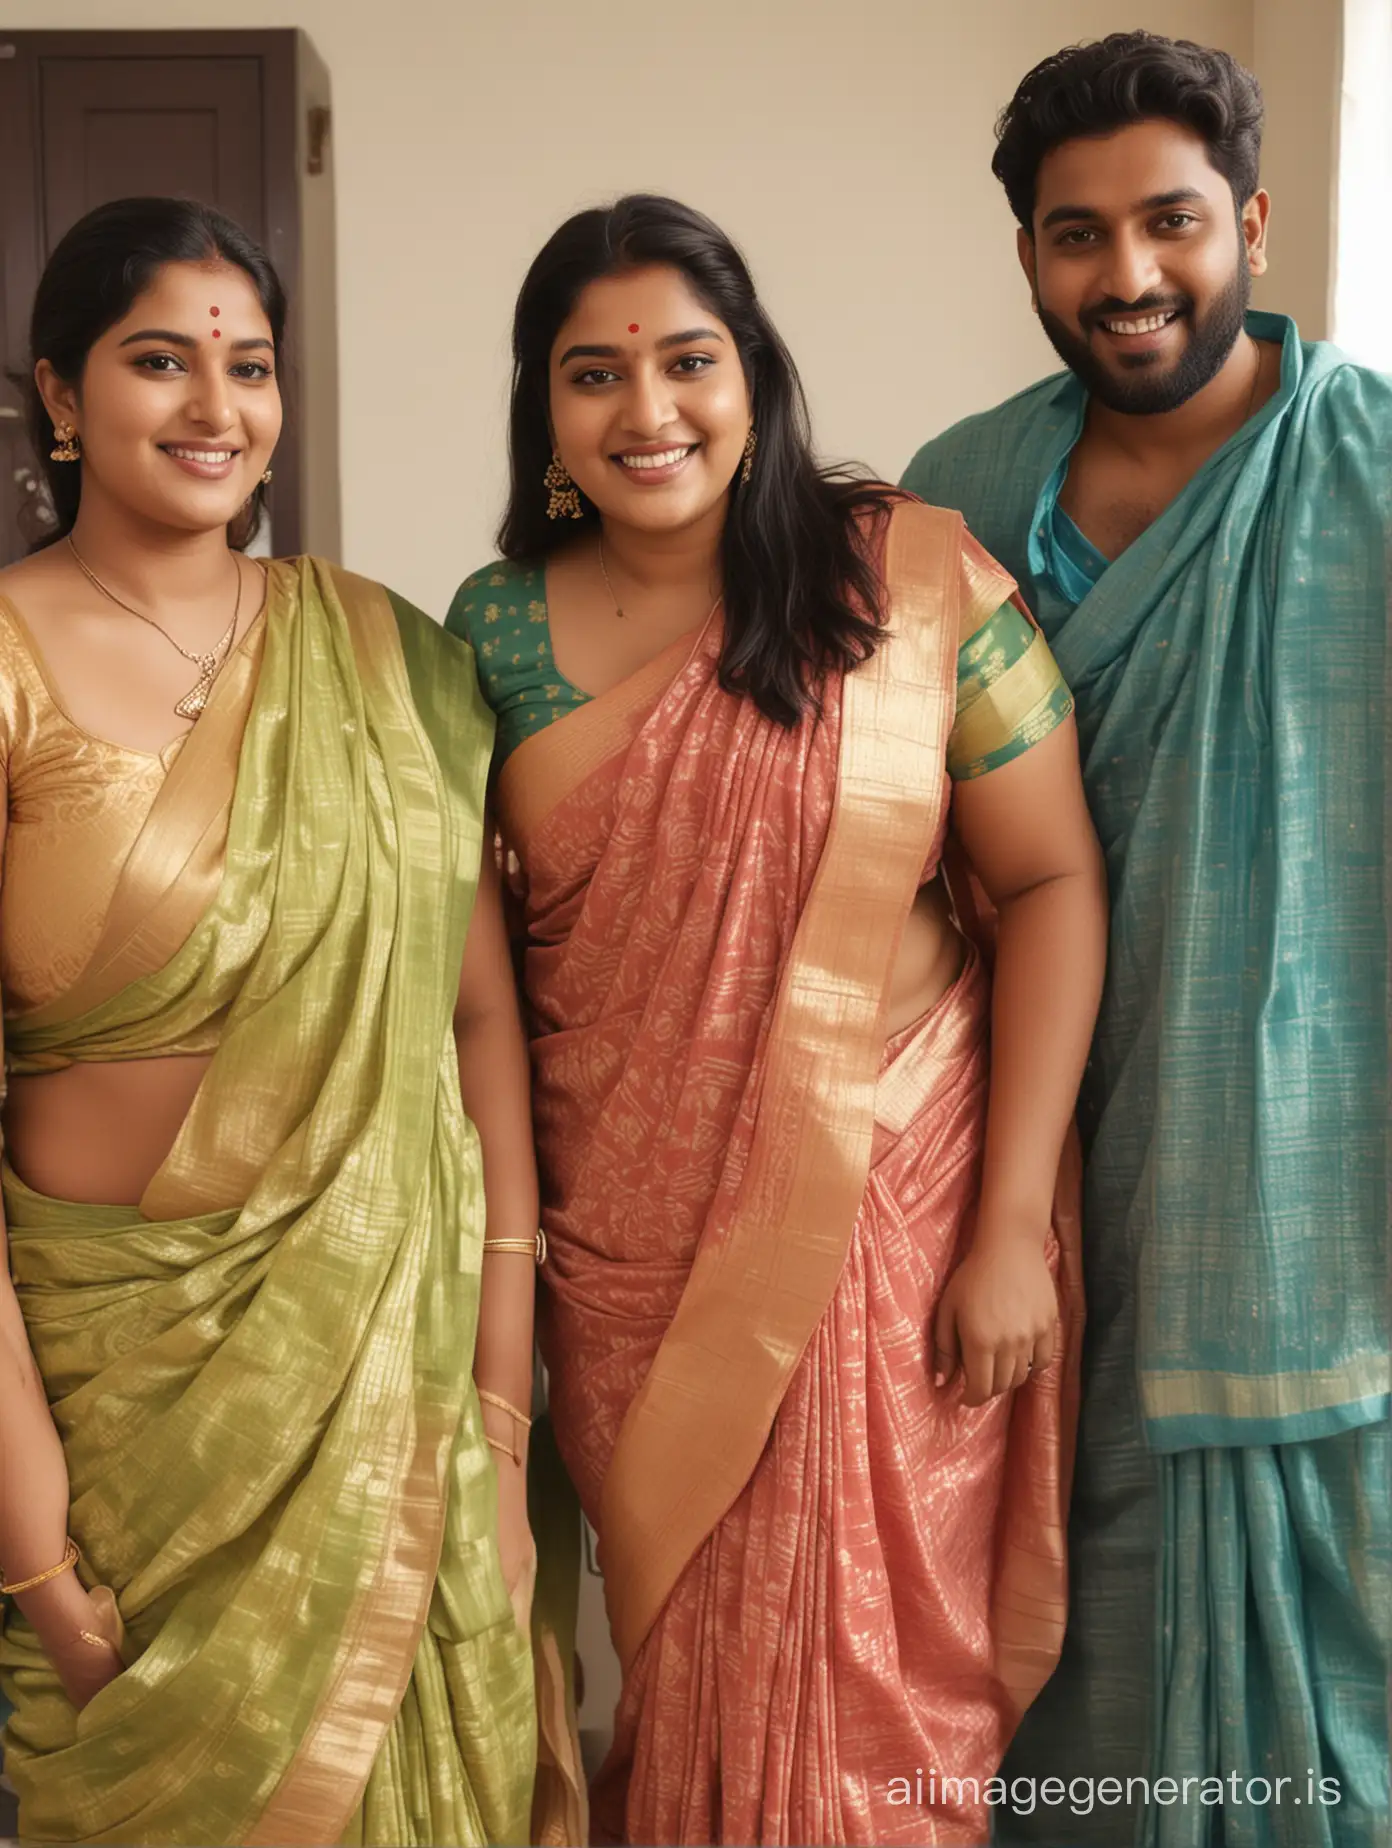 Indian-Plus-Size-Women-in-Sleeveless-Saree-Relaxing-with-Male-Friends